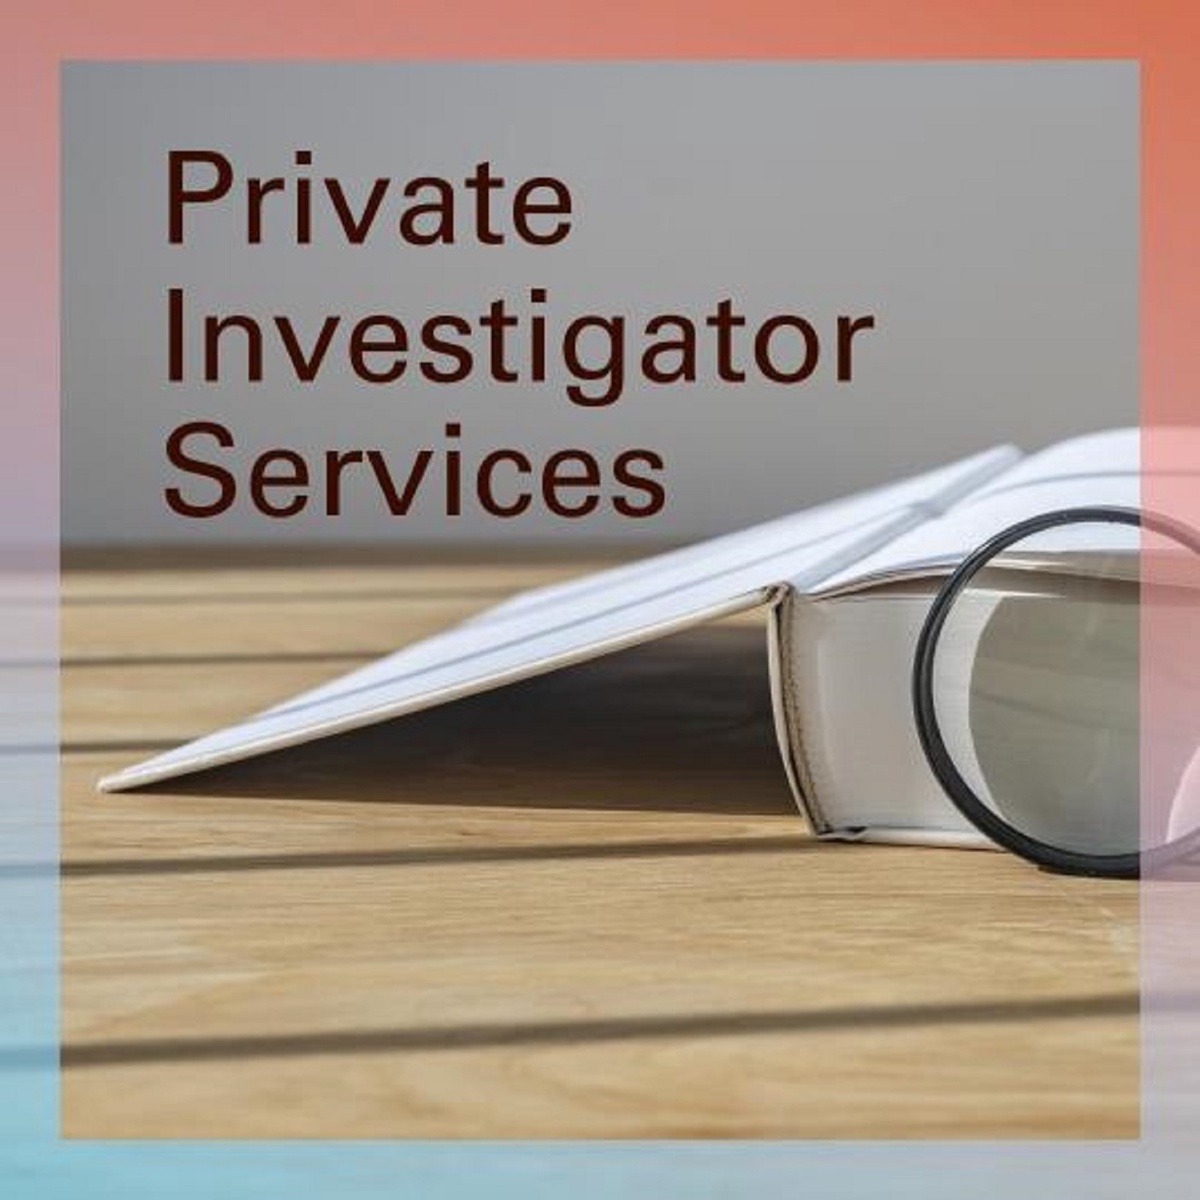 Today's World Has a Growing Need for Certified Private Investigators